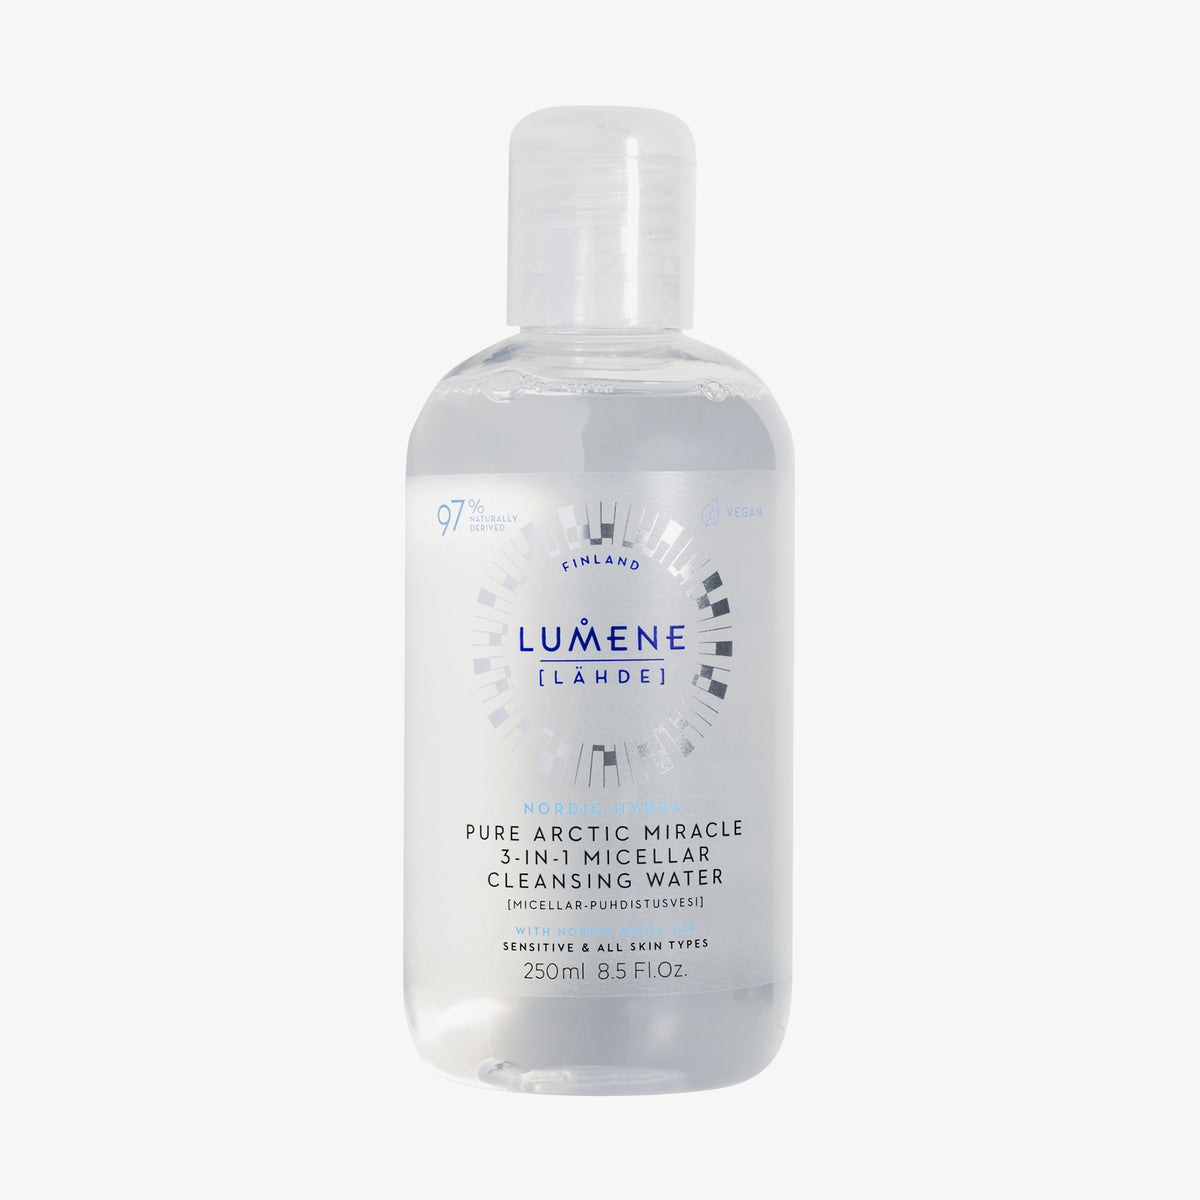 Lumene | NORDIC HYDRA [LAHDE] Pure Arctic Miracle 3-in-1 Micellar Cleansing Water